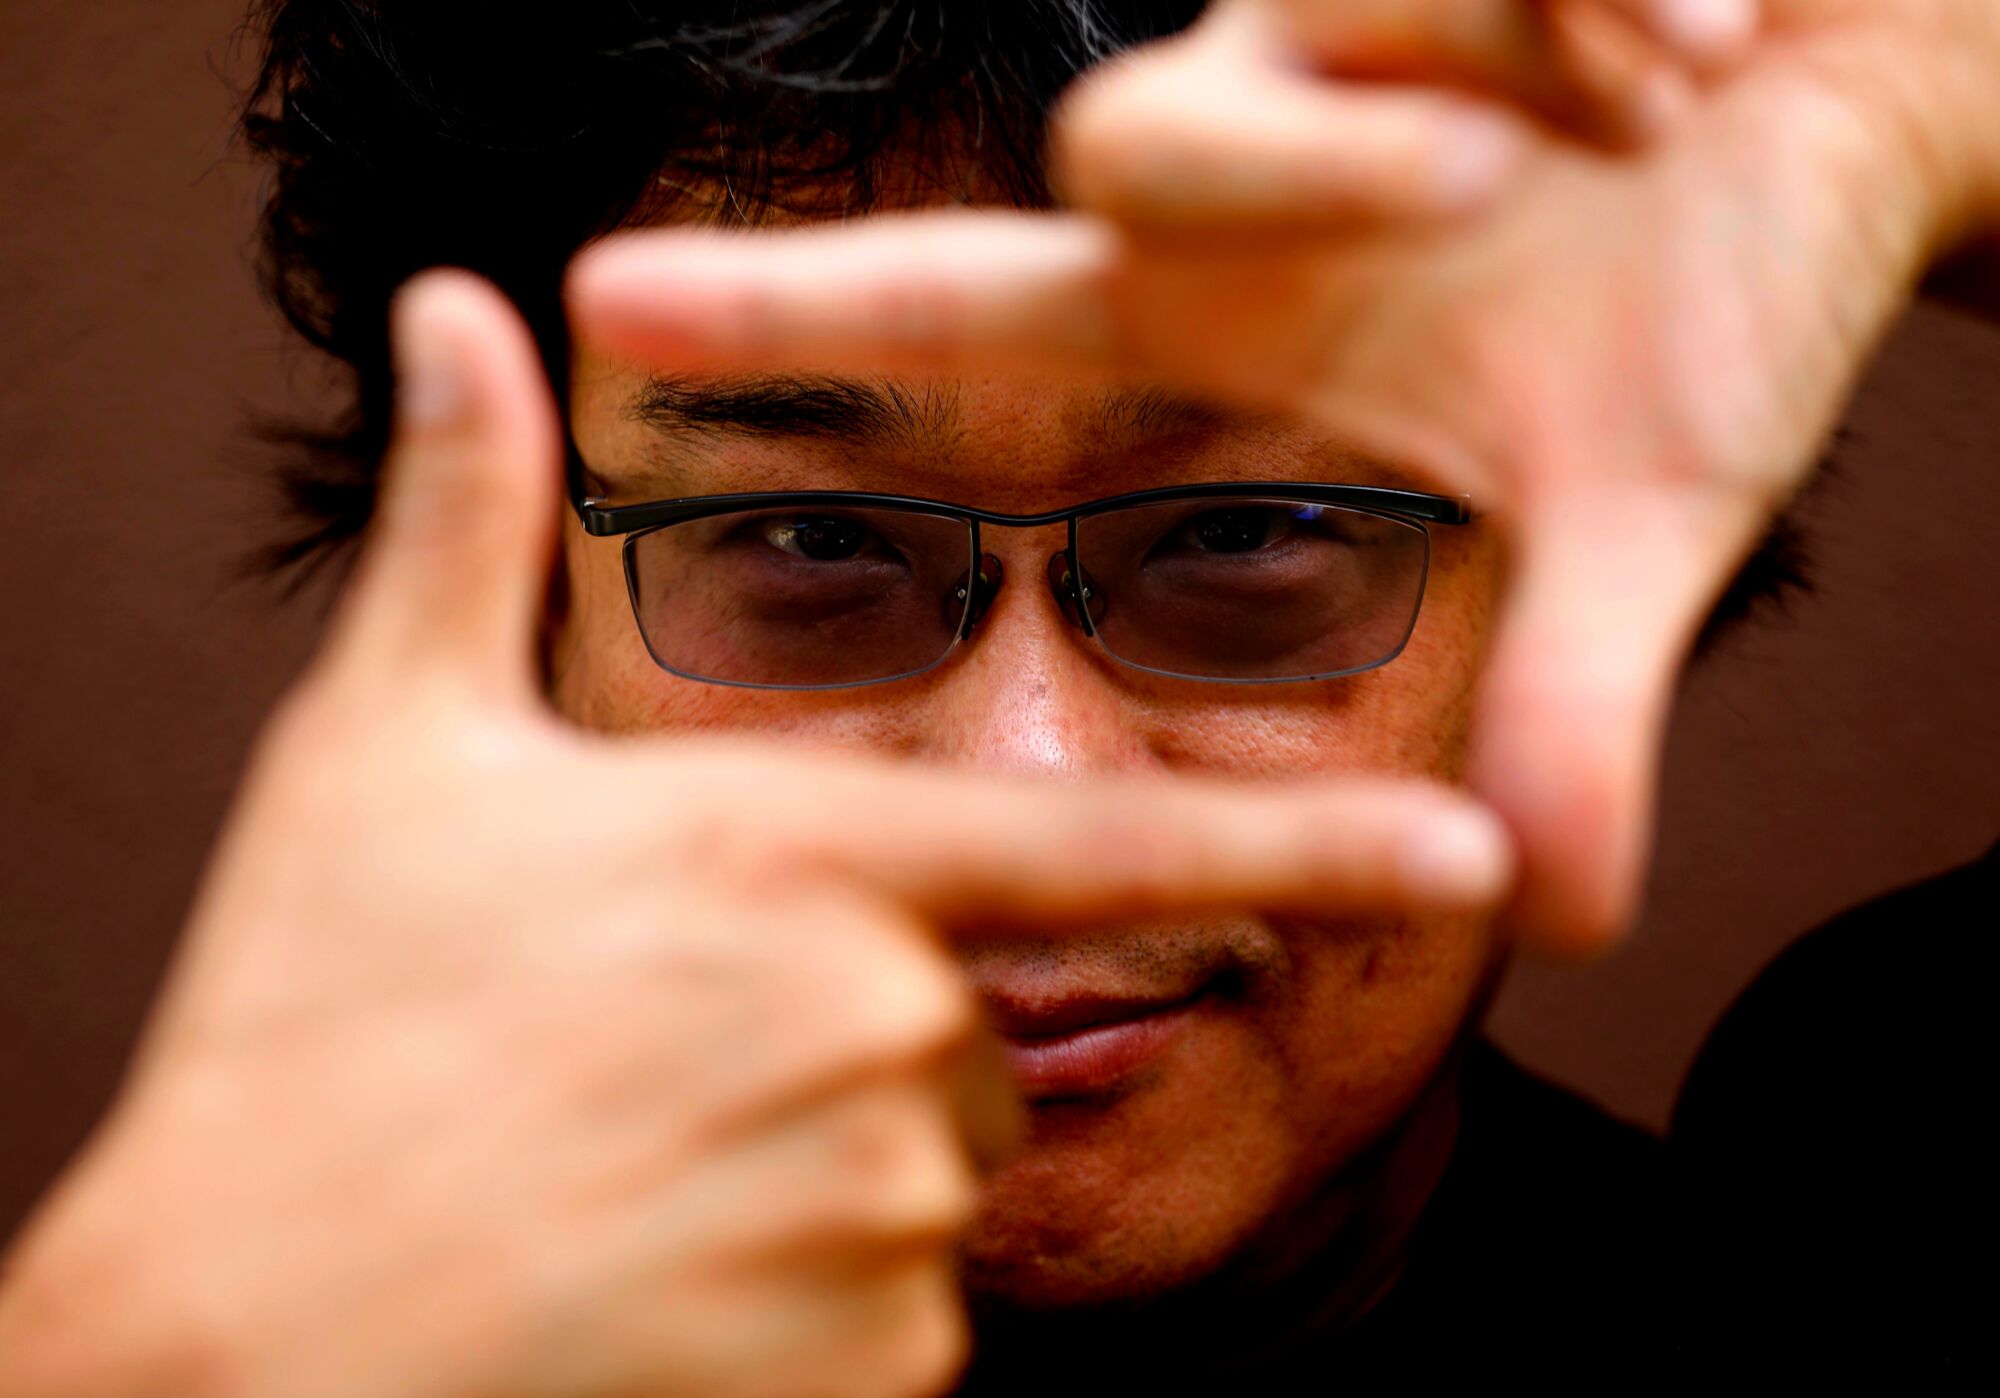 A man uses his hands to create a frame in front of his face.